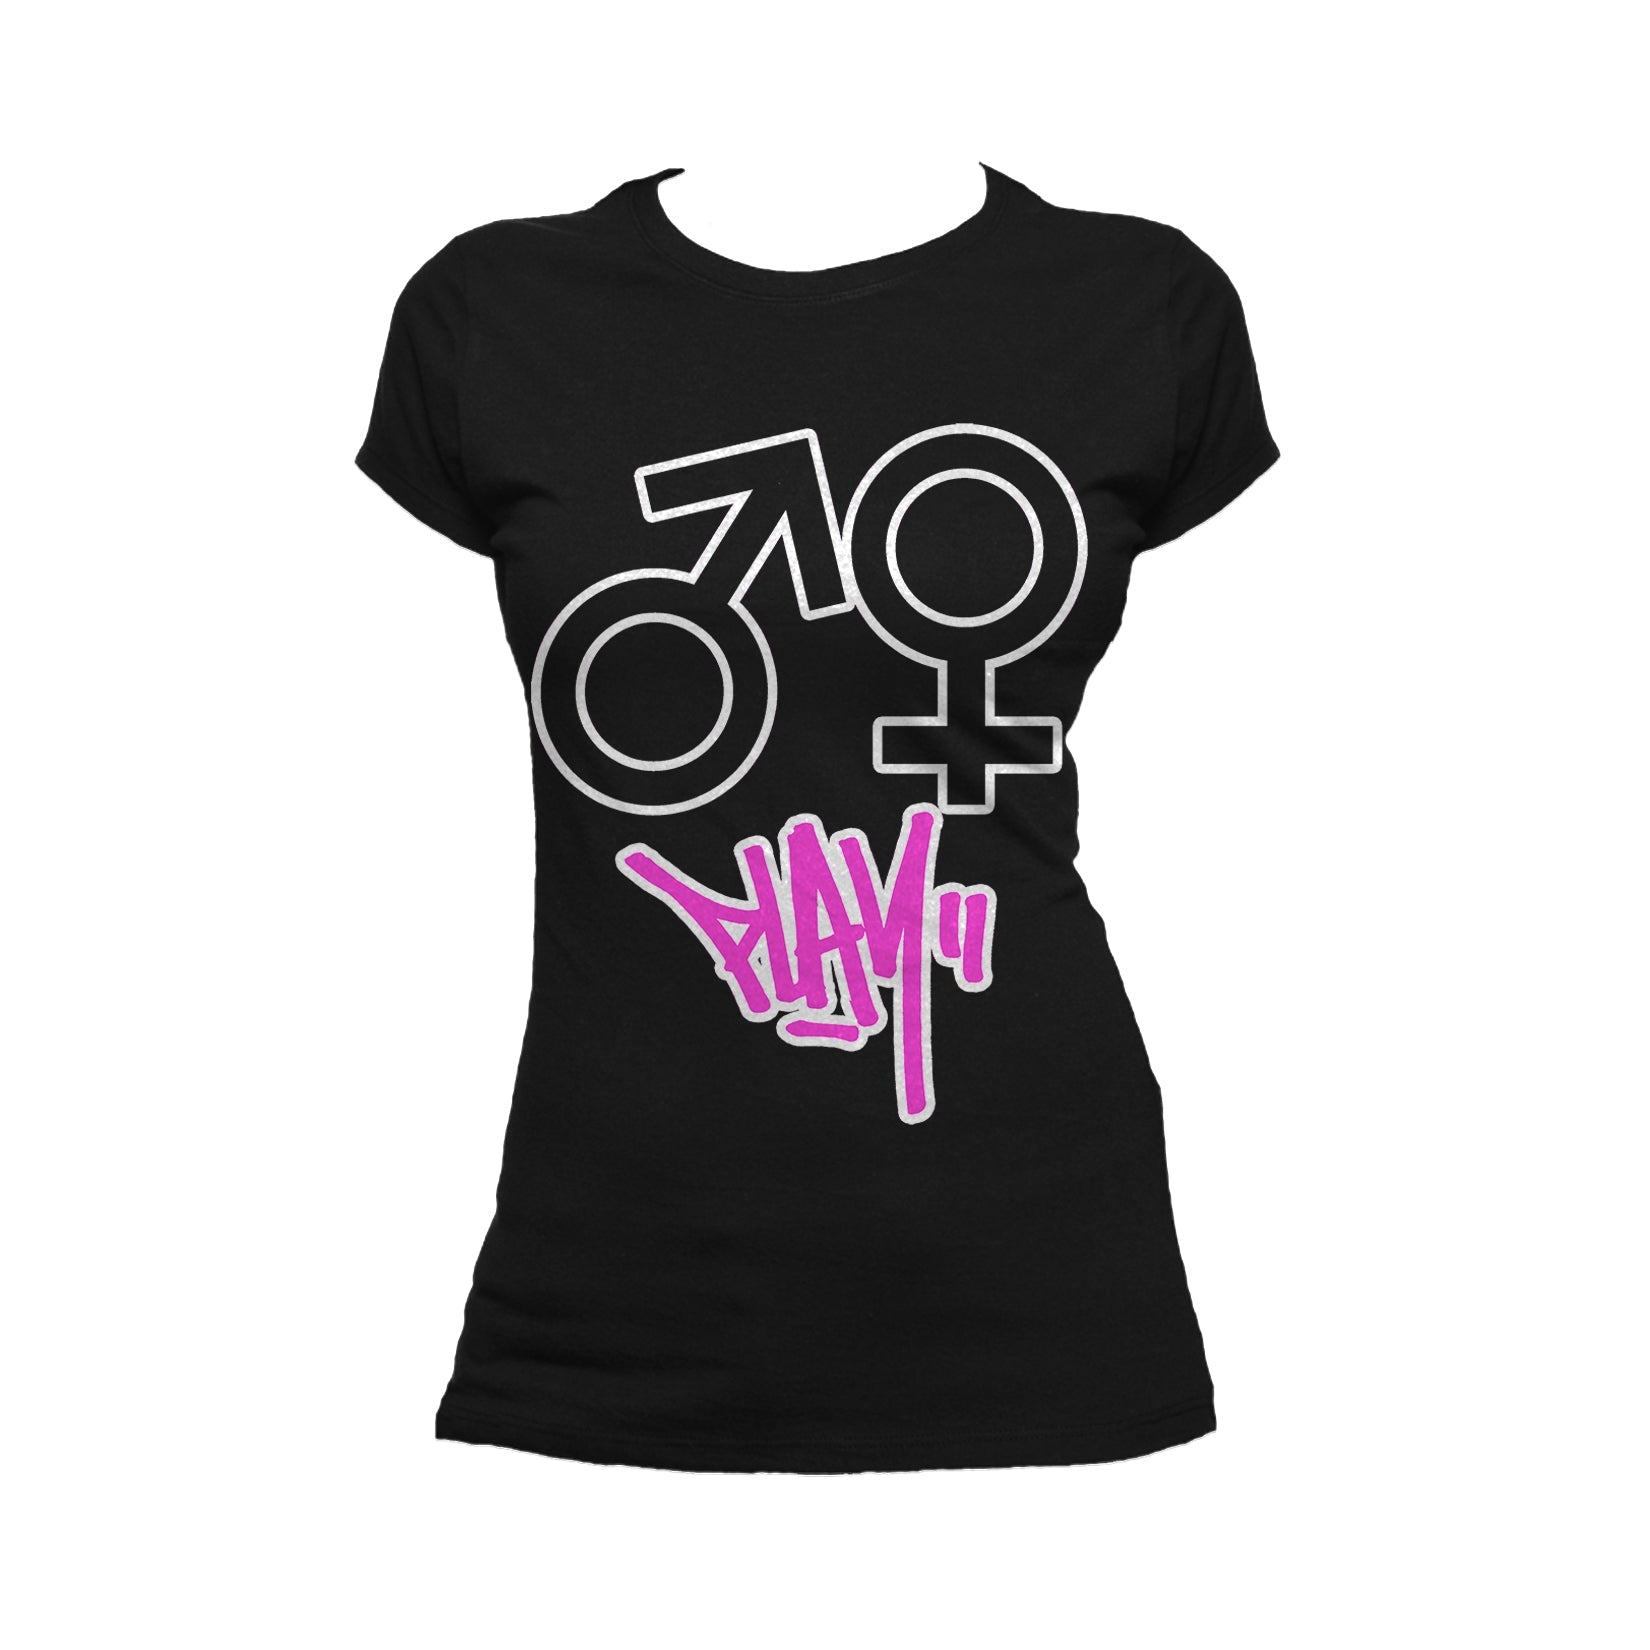 US Brand X Old's Kool Play Official Women's T-Shirt ()